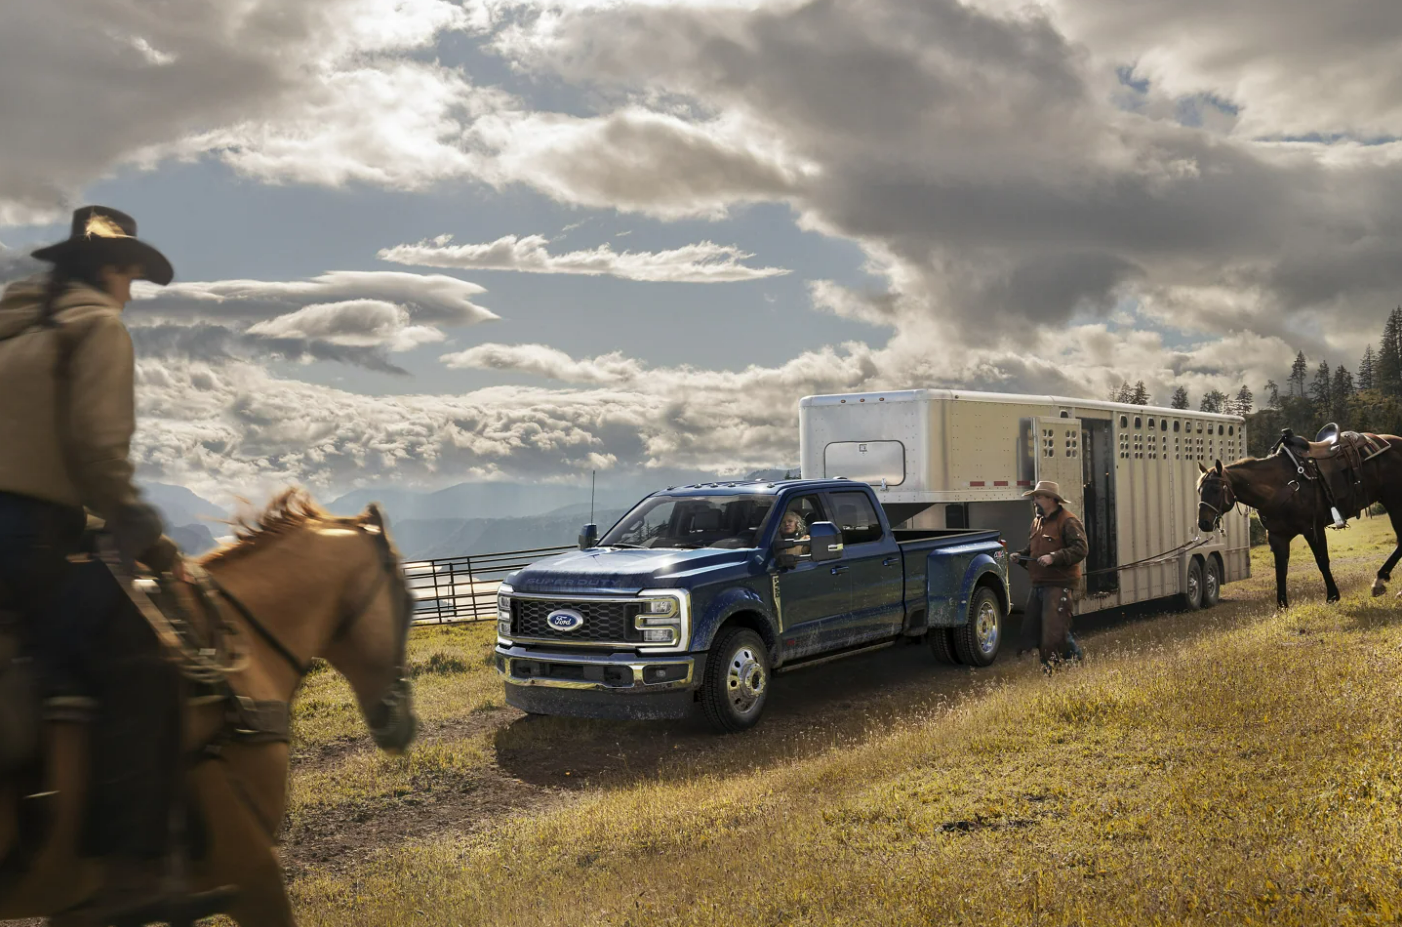 A 2023 Ford F-350 Super Duty hauling a horse trailer is parked in a field